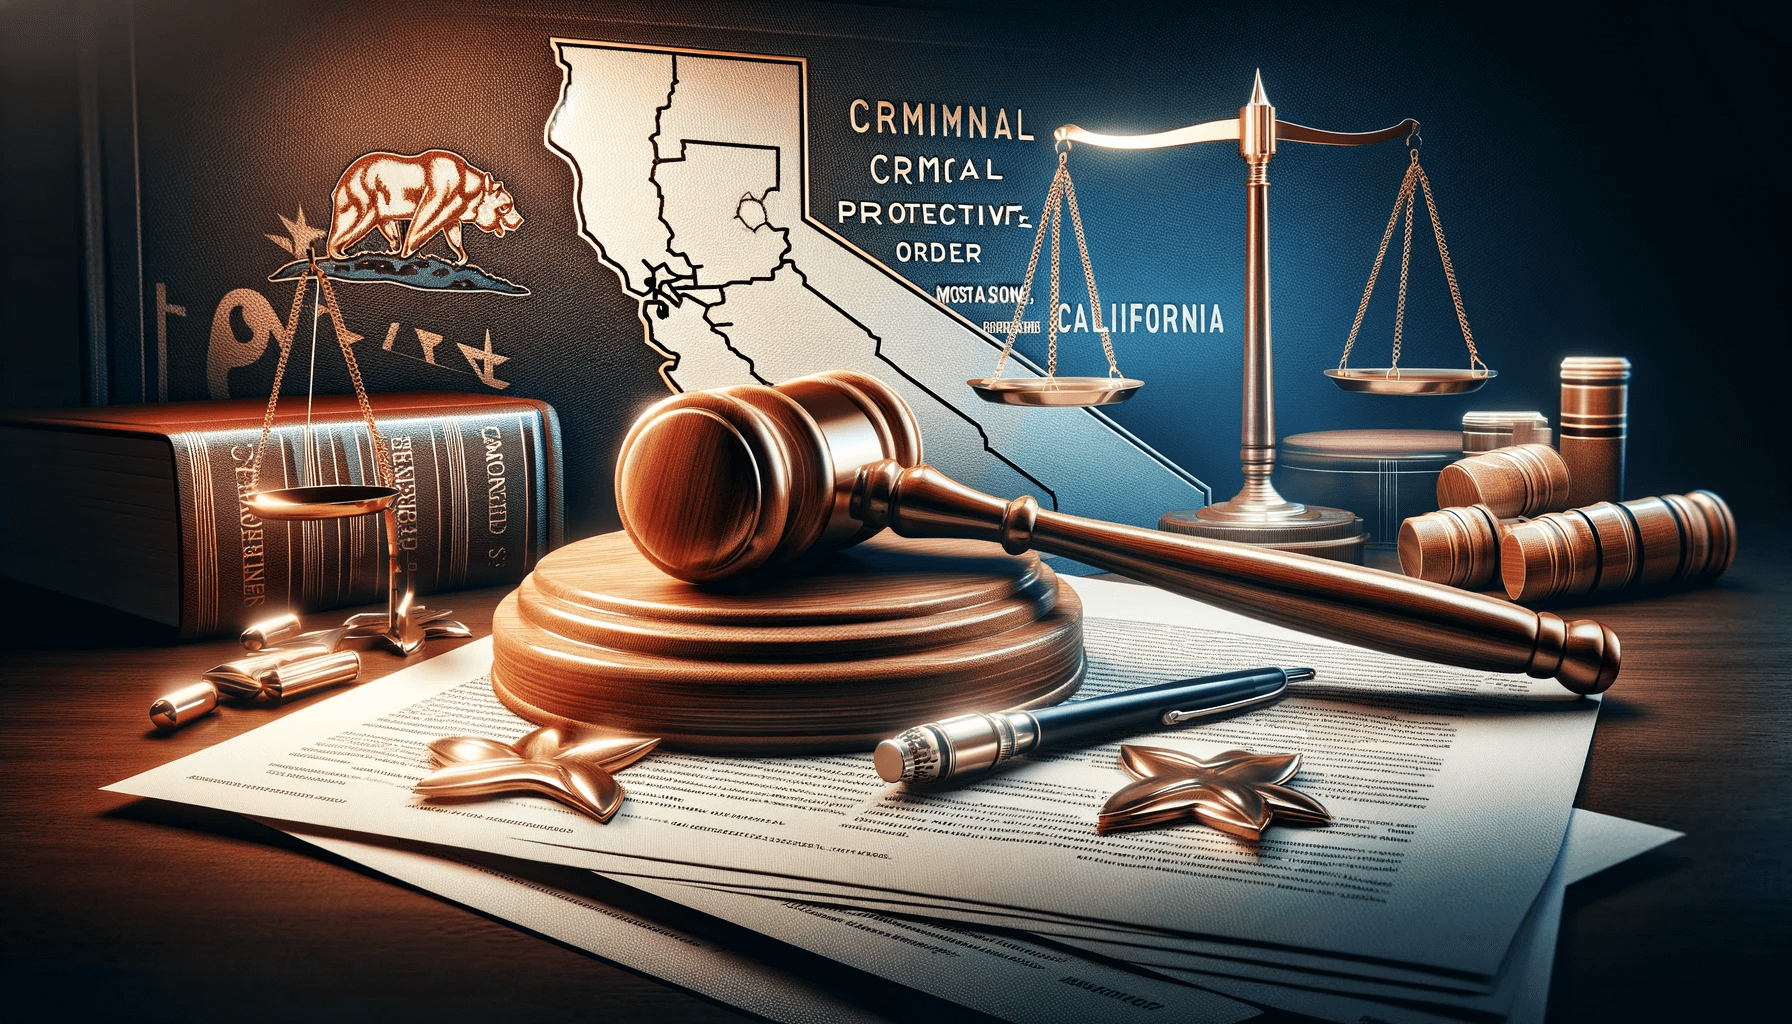 How to Remove a Criminal Protective Order in California